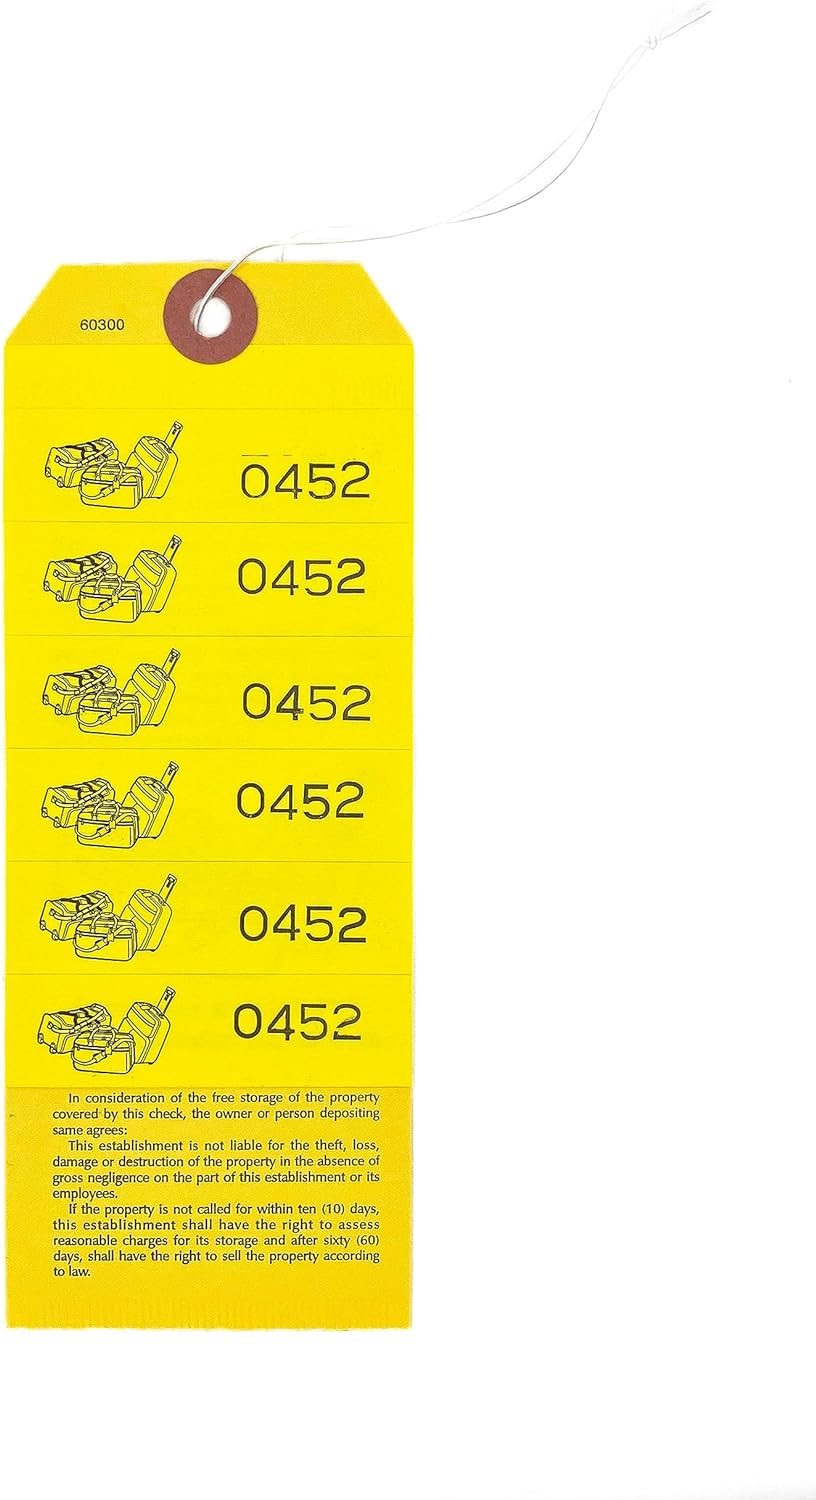 Luggage Claim Tag with String, Serial Numbers, Bag Stickers, and Claim Ticket - Blank Bag Tags with Stickers for Hotel and Motel Bag Storage (Set of 1000)